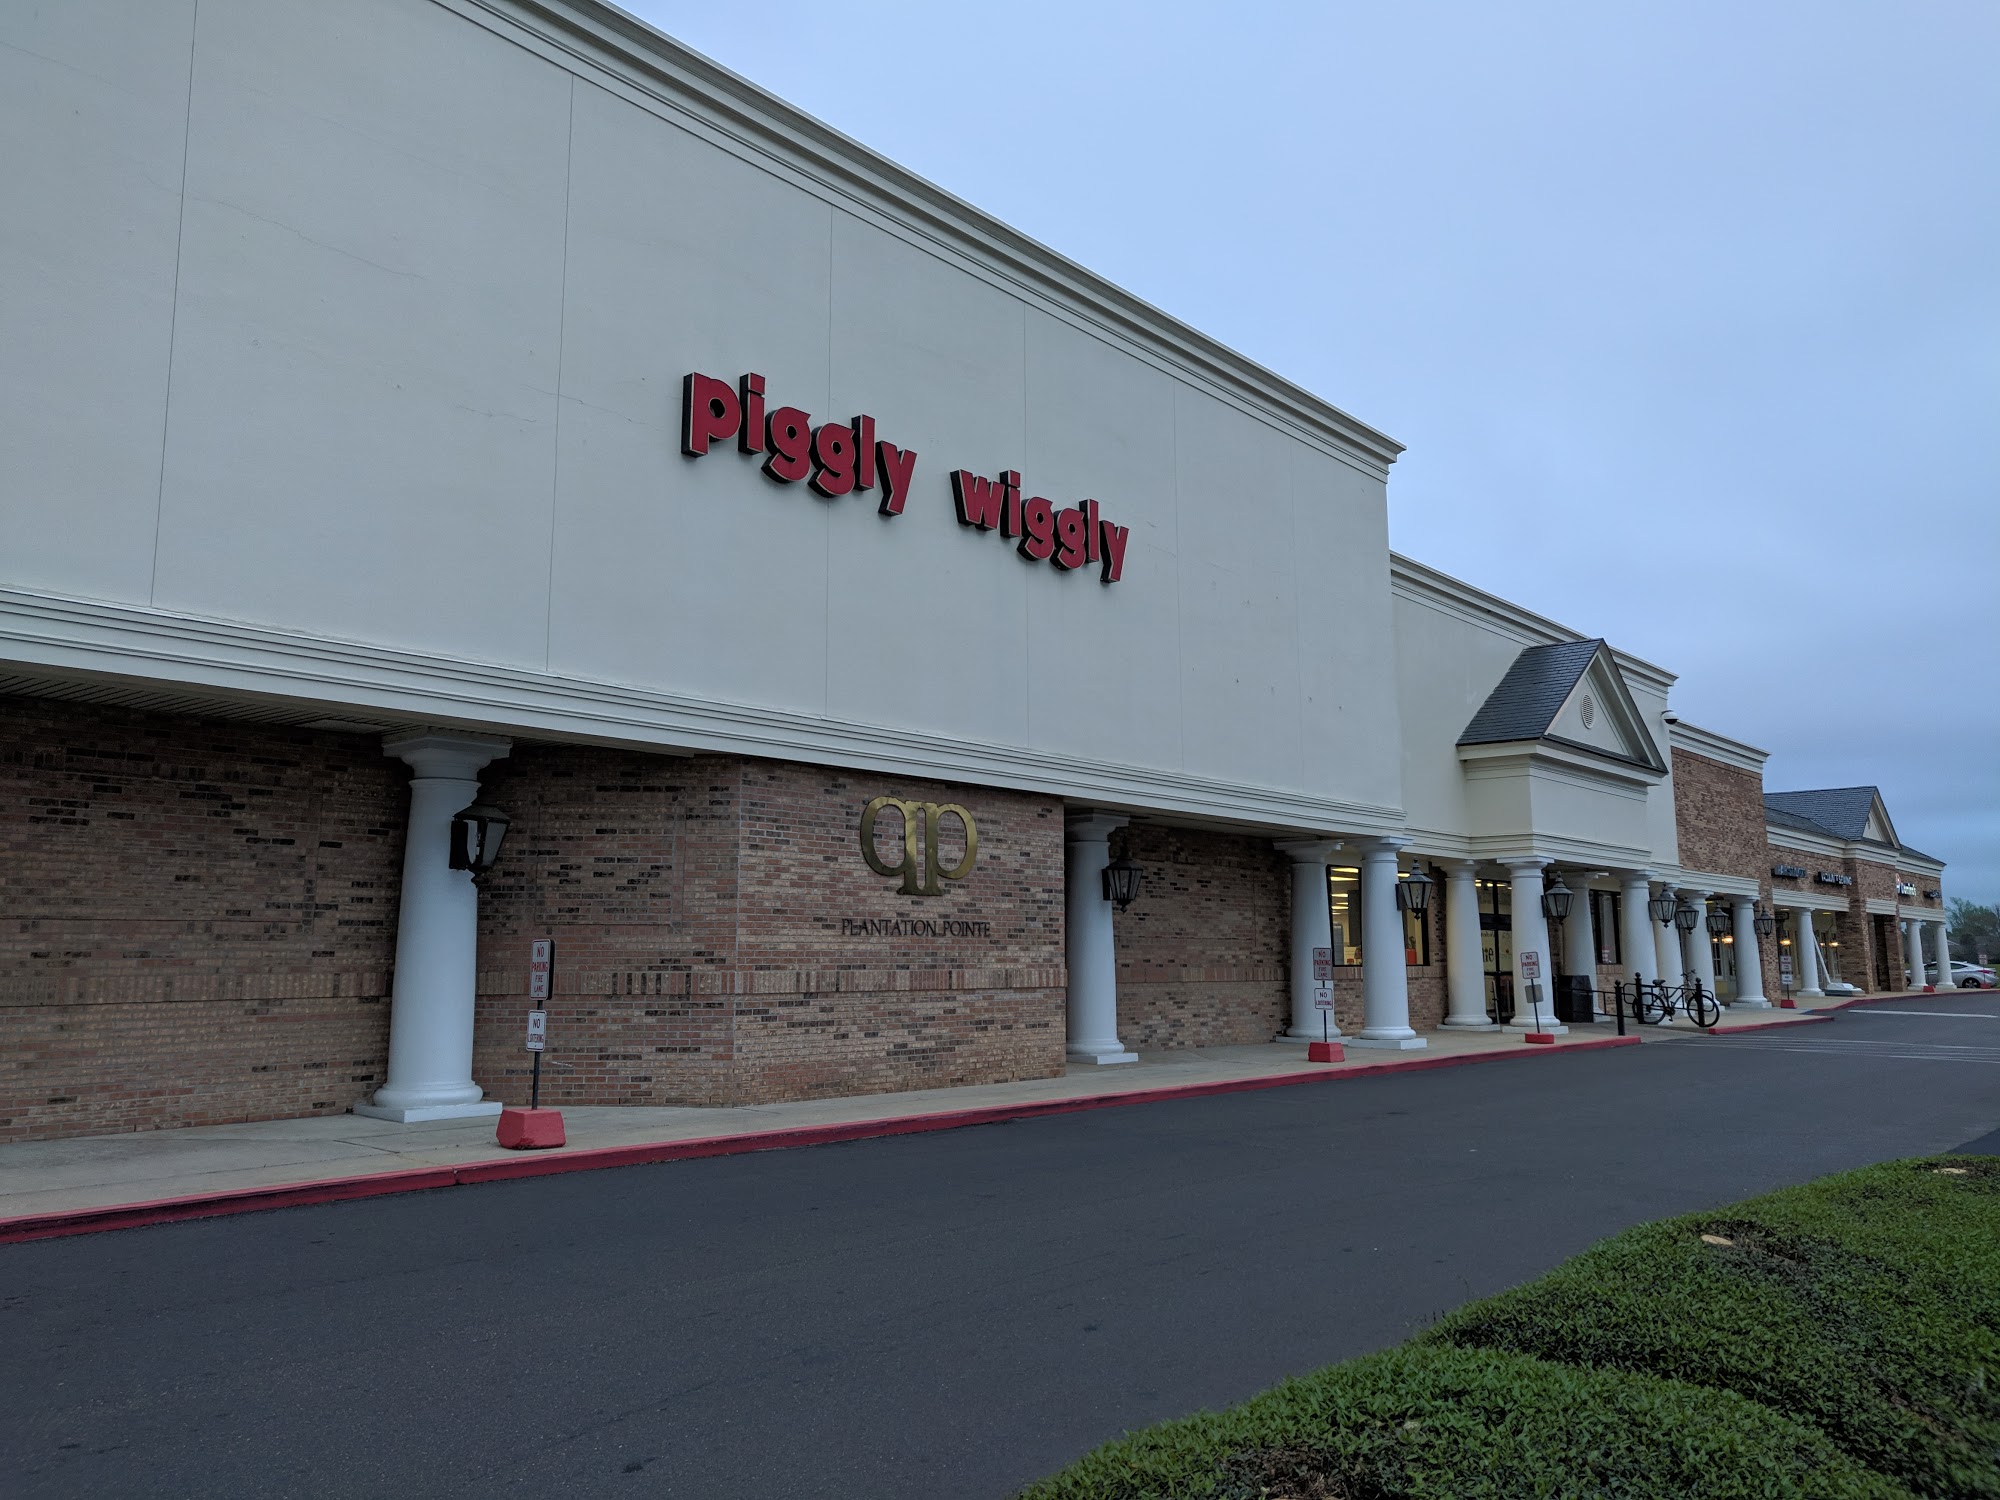 Piggly Wiggly Fairhope